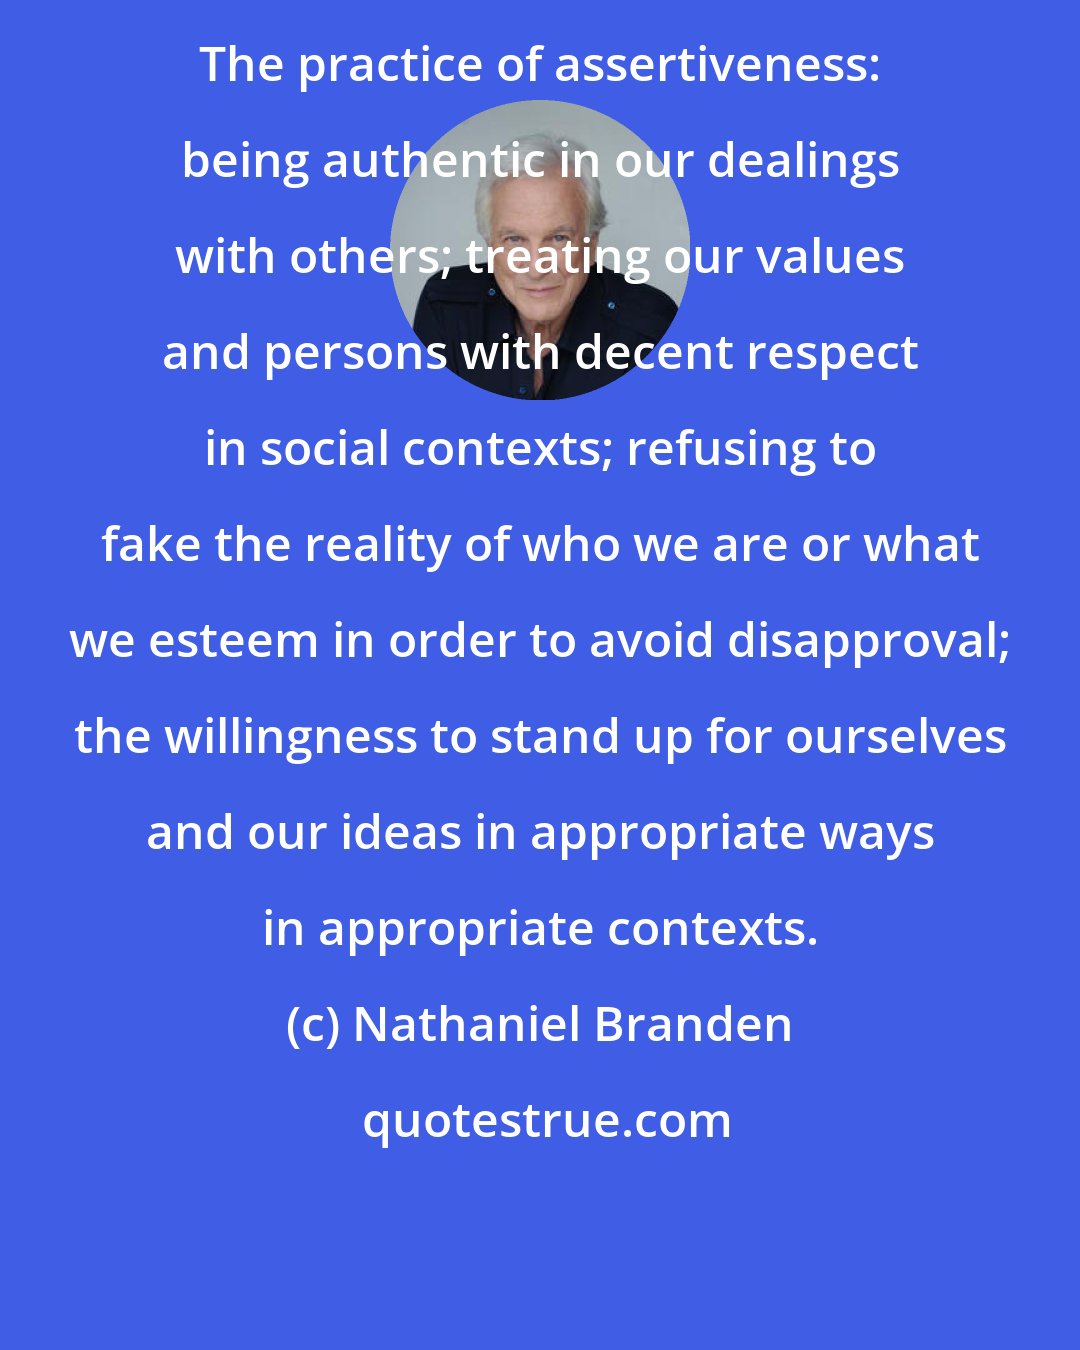 Nathaniel Branden: The practice of assertiveness: being authentic in our dealings with others; treating our values and persons with decent respect in social contexts; refusing to fake the reality of who we are or what we esteem in order to avoid disapproval; the willingness to stand up for ourselves and our ideas in appropriate ways in appropriate contexts.